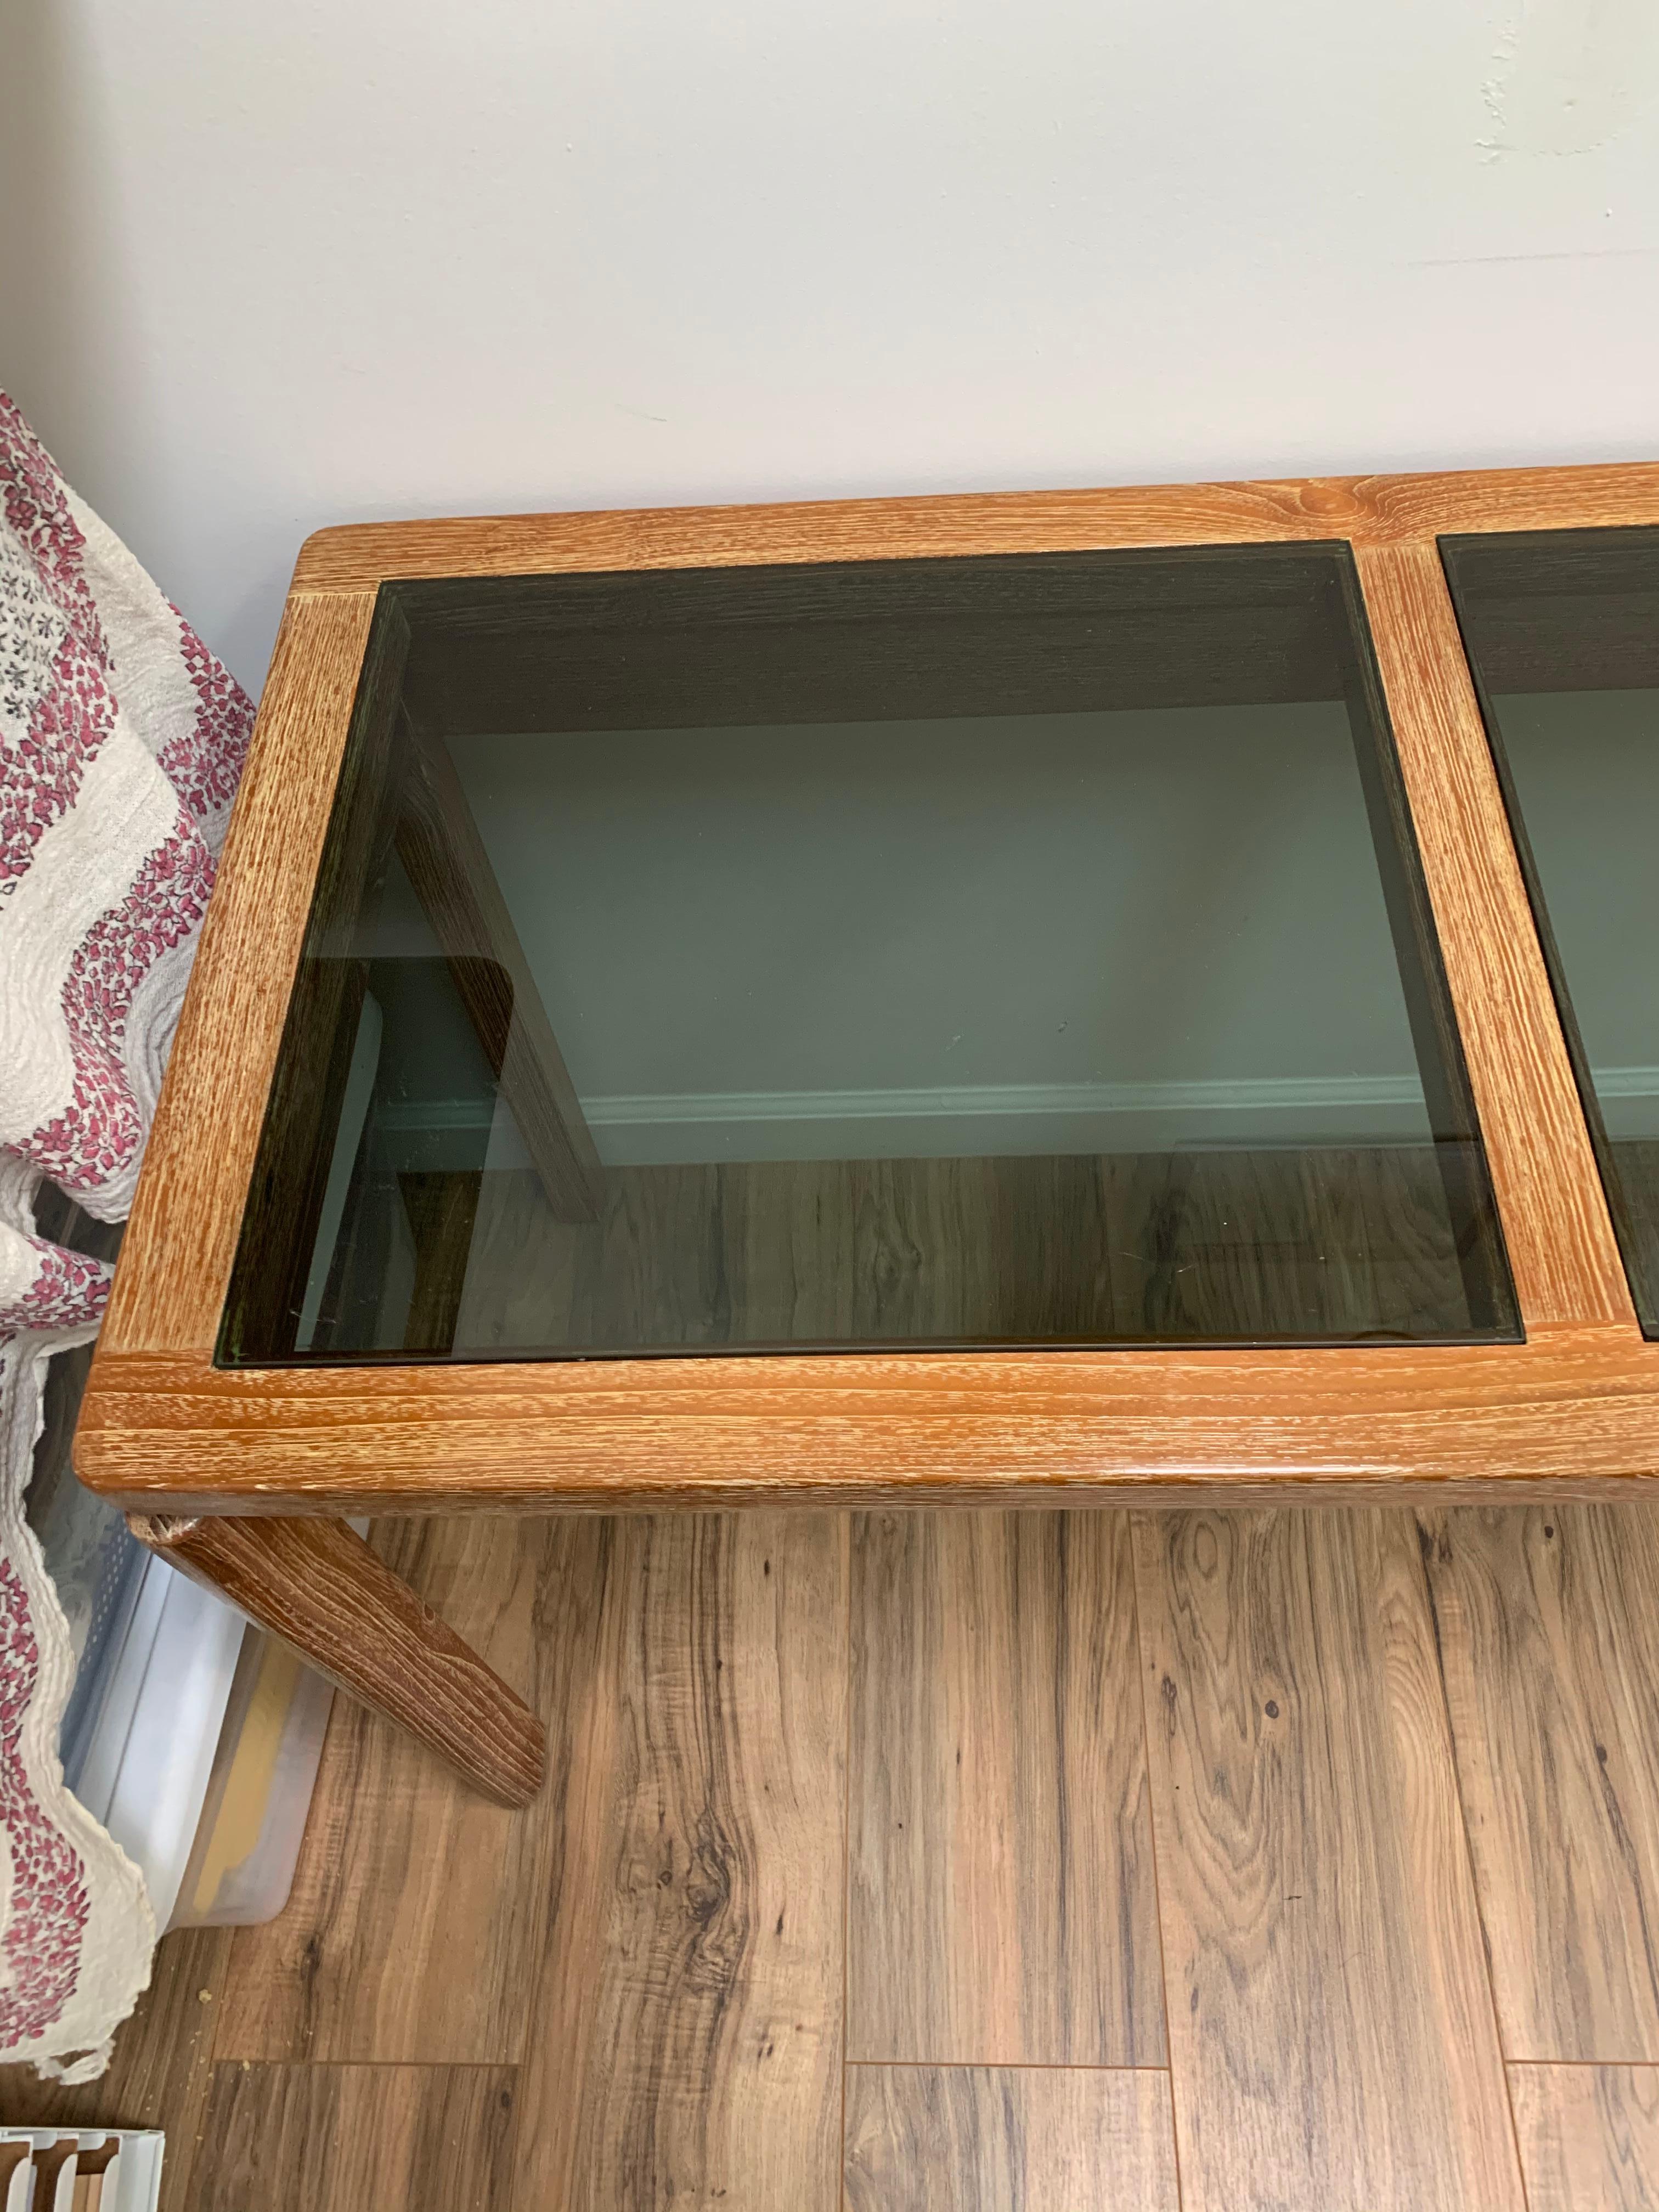 3 Glass Panel Floating Entry Console In Excellent Condition For Sale In Bronx, NY